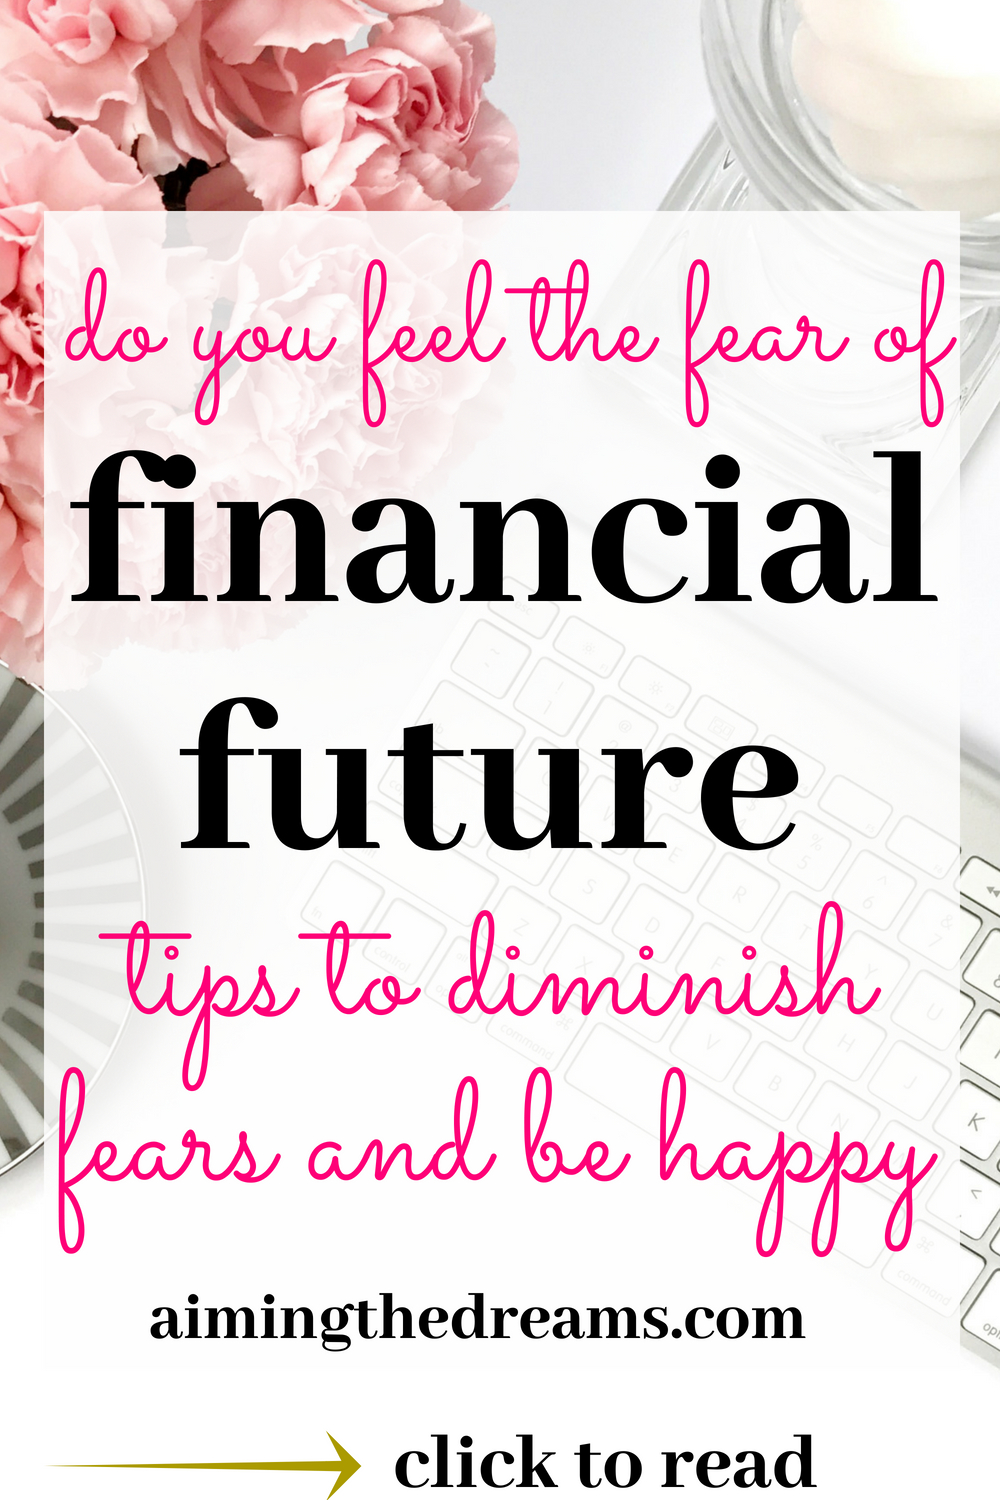 #Tips to remove# financial #planning fears for #beginners. As you go on saving and investing, you will feel more comfortable with your finances. click to read.